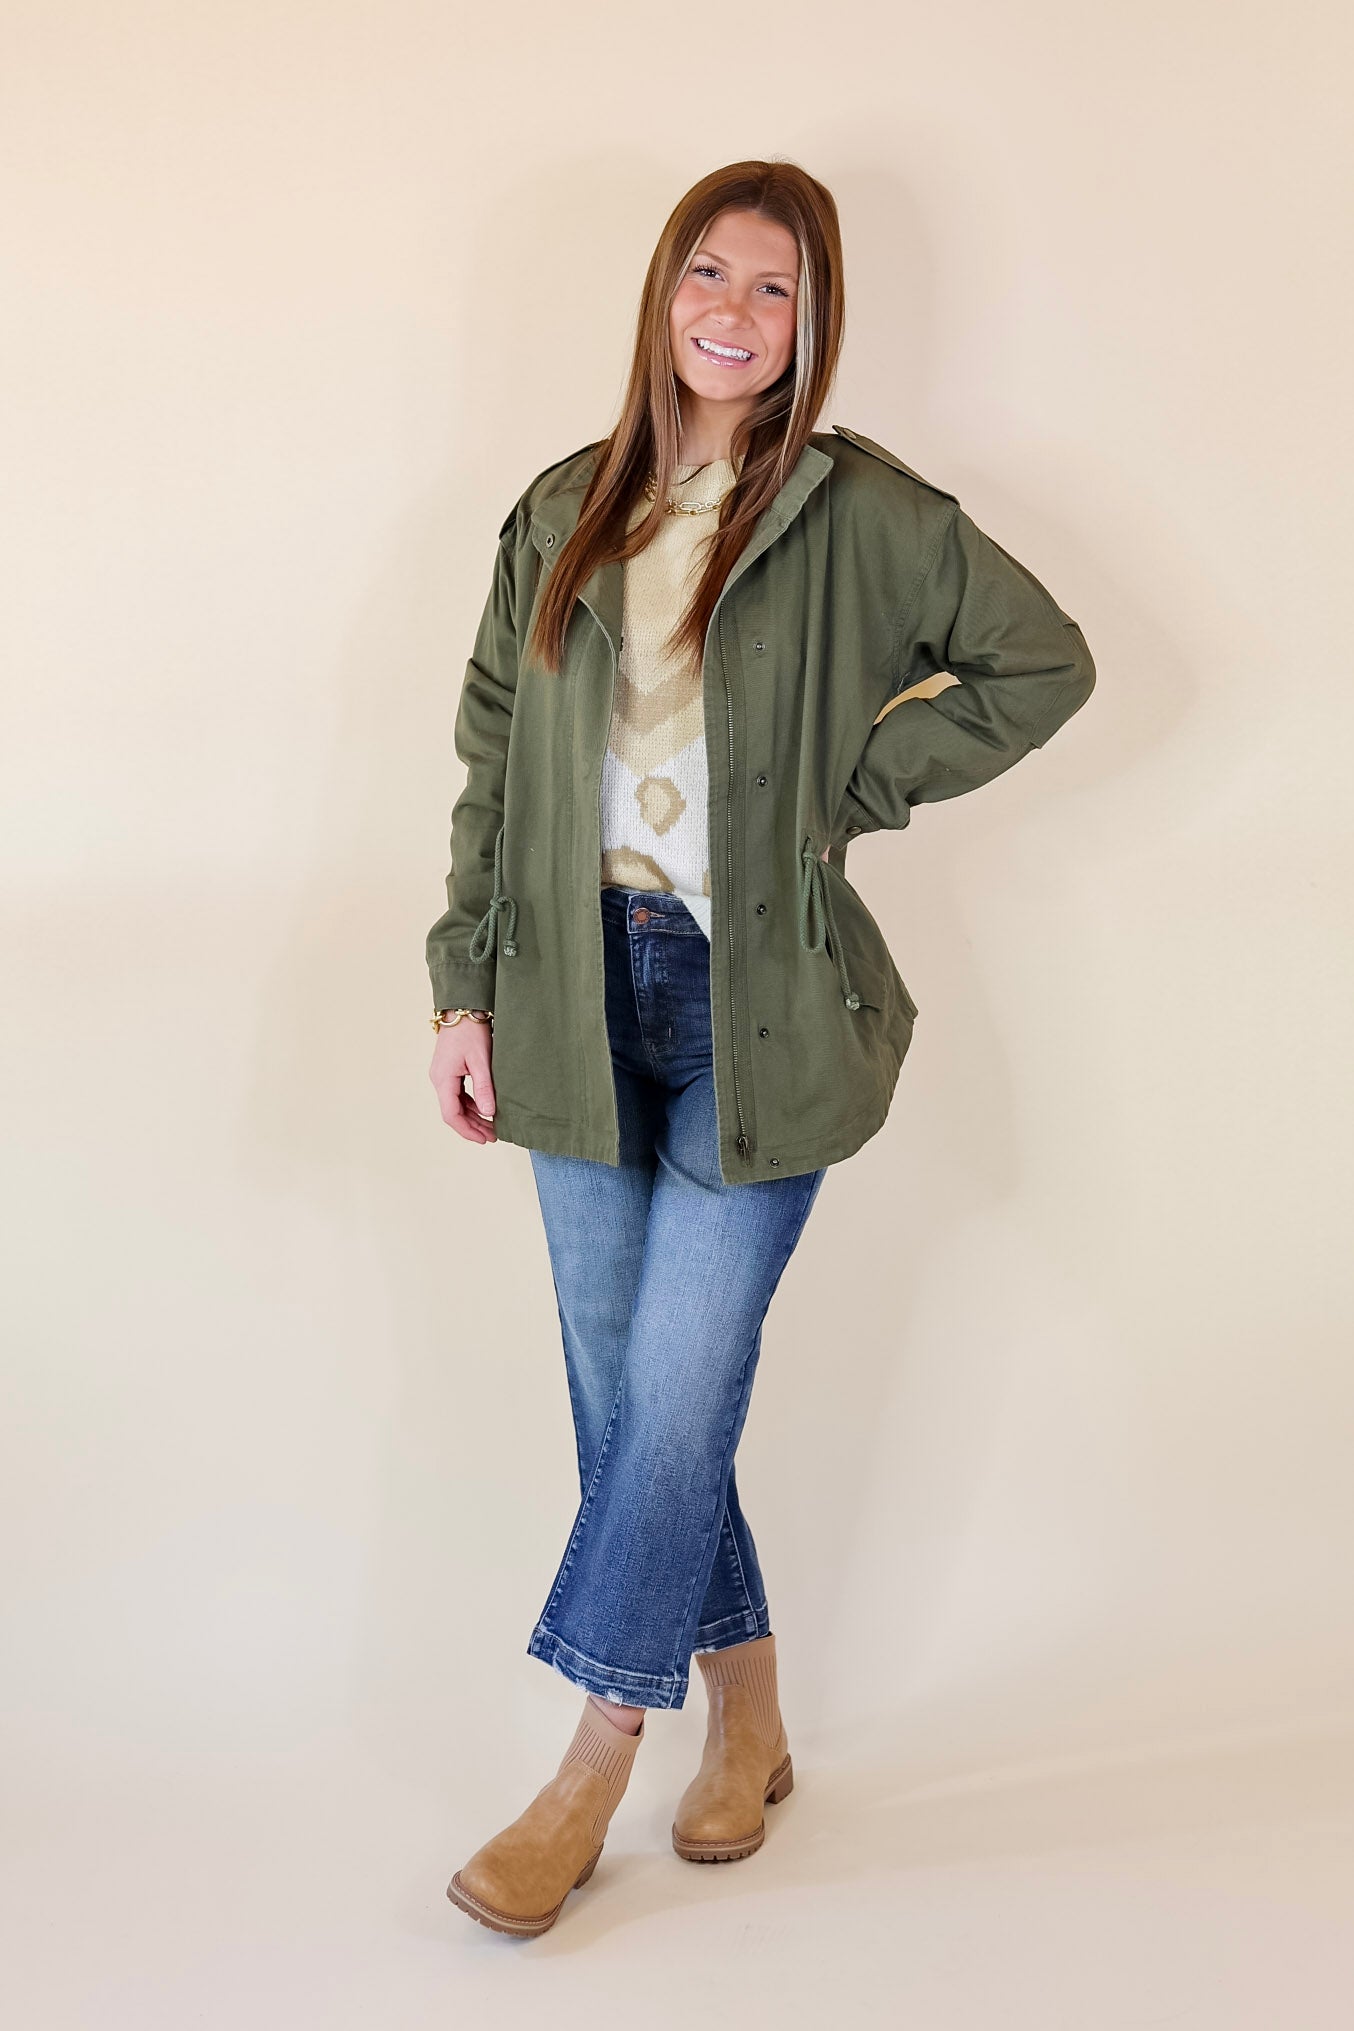 Anything is Possible Button and Zip Up Utility Jacket in Olive Green - Giddy Up Glamour Boutique